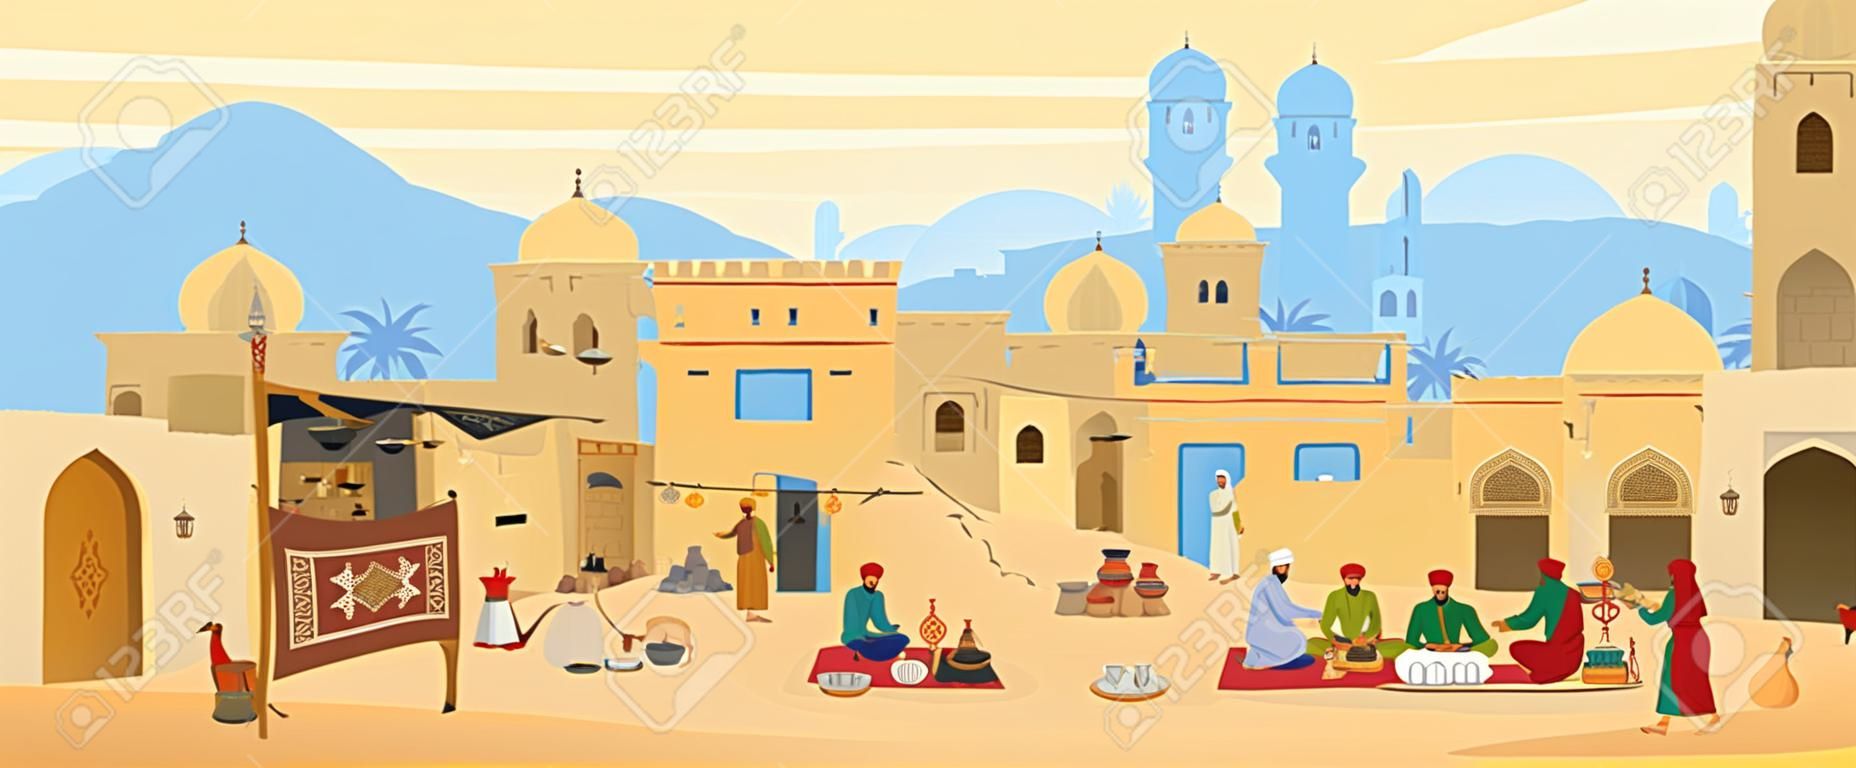 Vector Flat illustration of Middle Eastern Town. Arabic desert landscape with traditional mud brick houses and people. Street Bazaar With Carpets, ceramics, fruits, spices. islamic architecture.